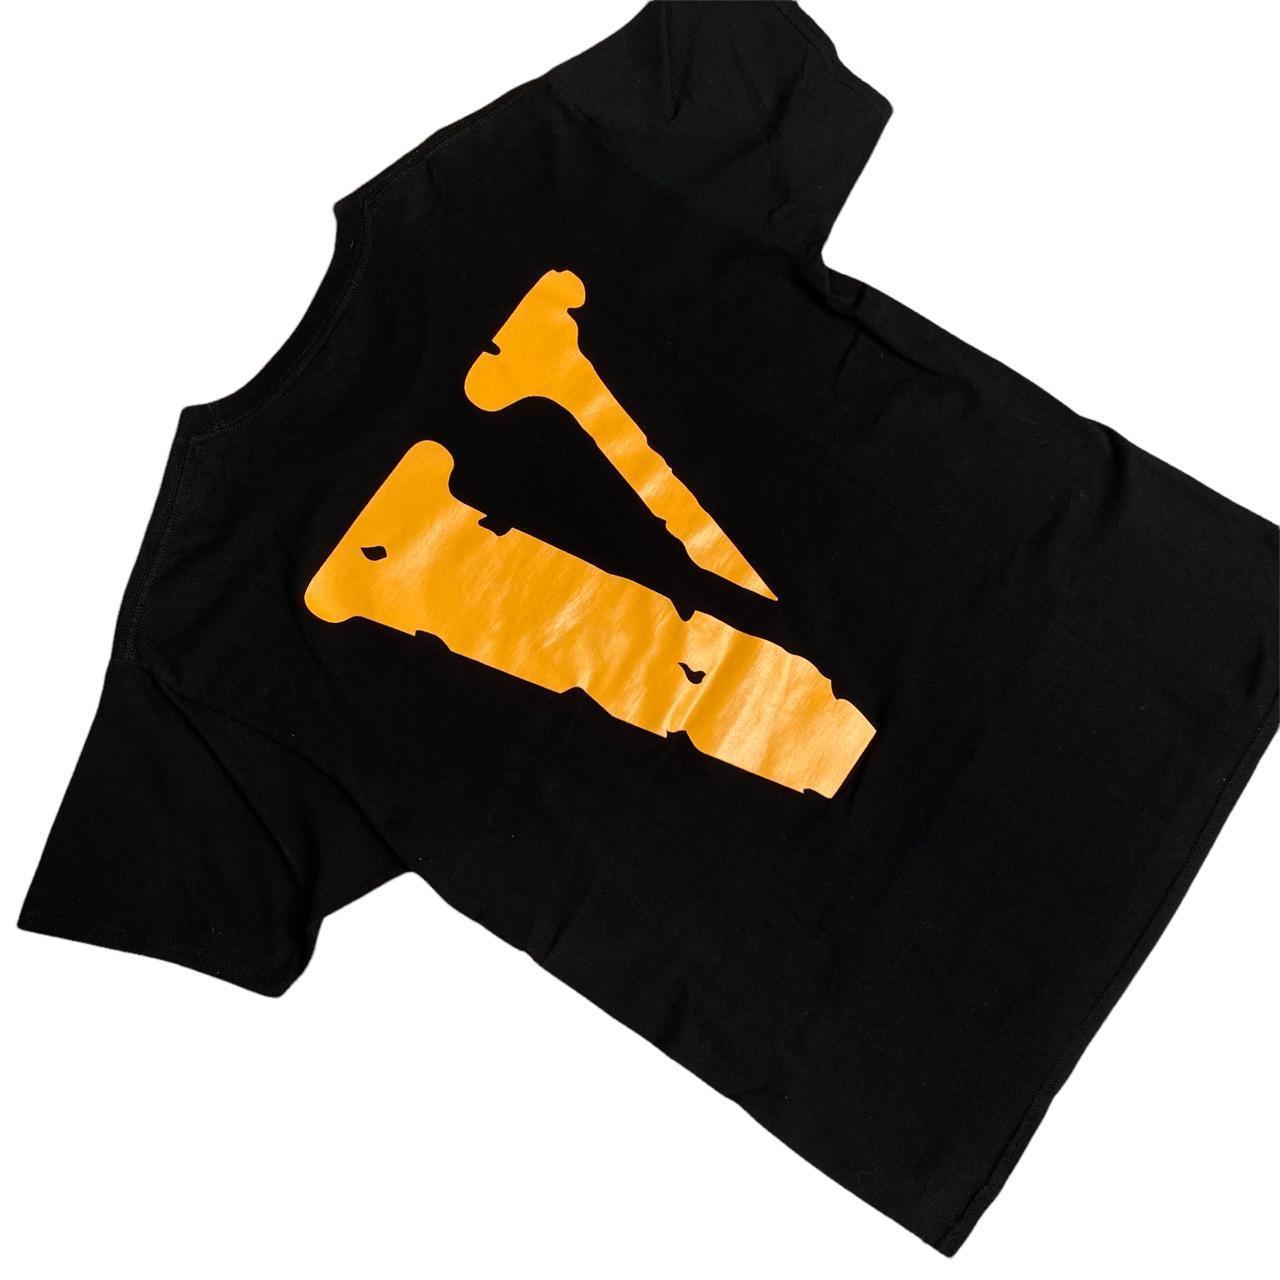 Vlone Front and back Logo Tee Black Orange (M) - Known Source